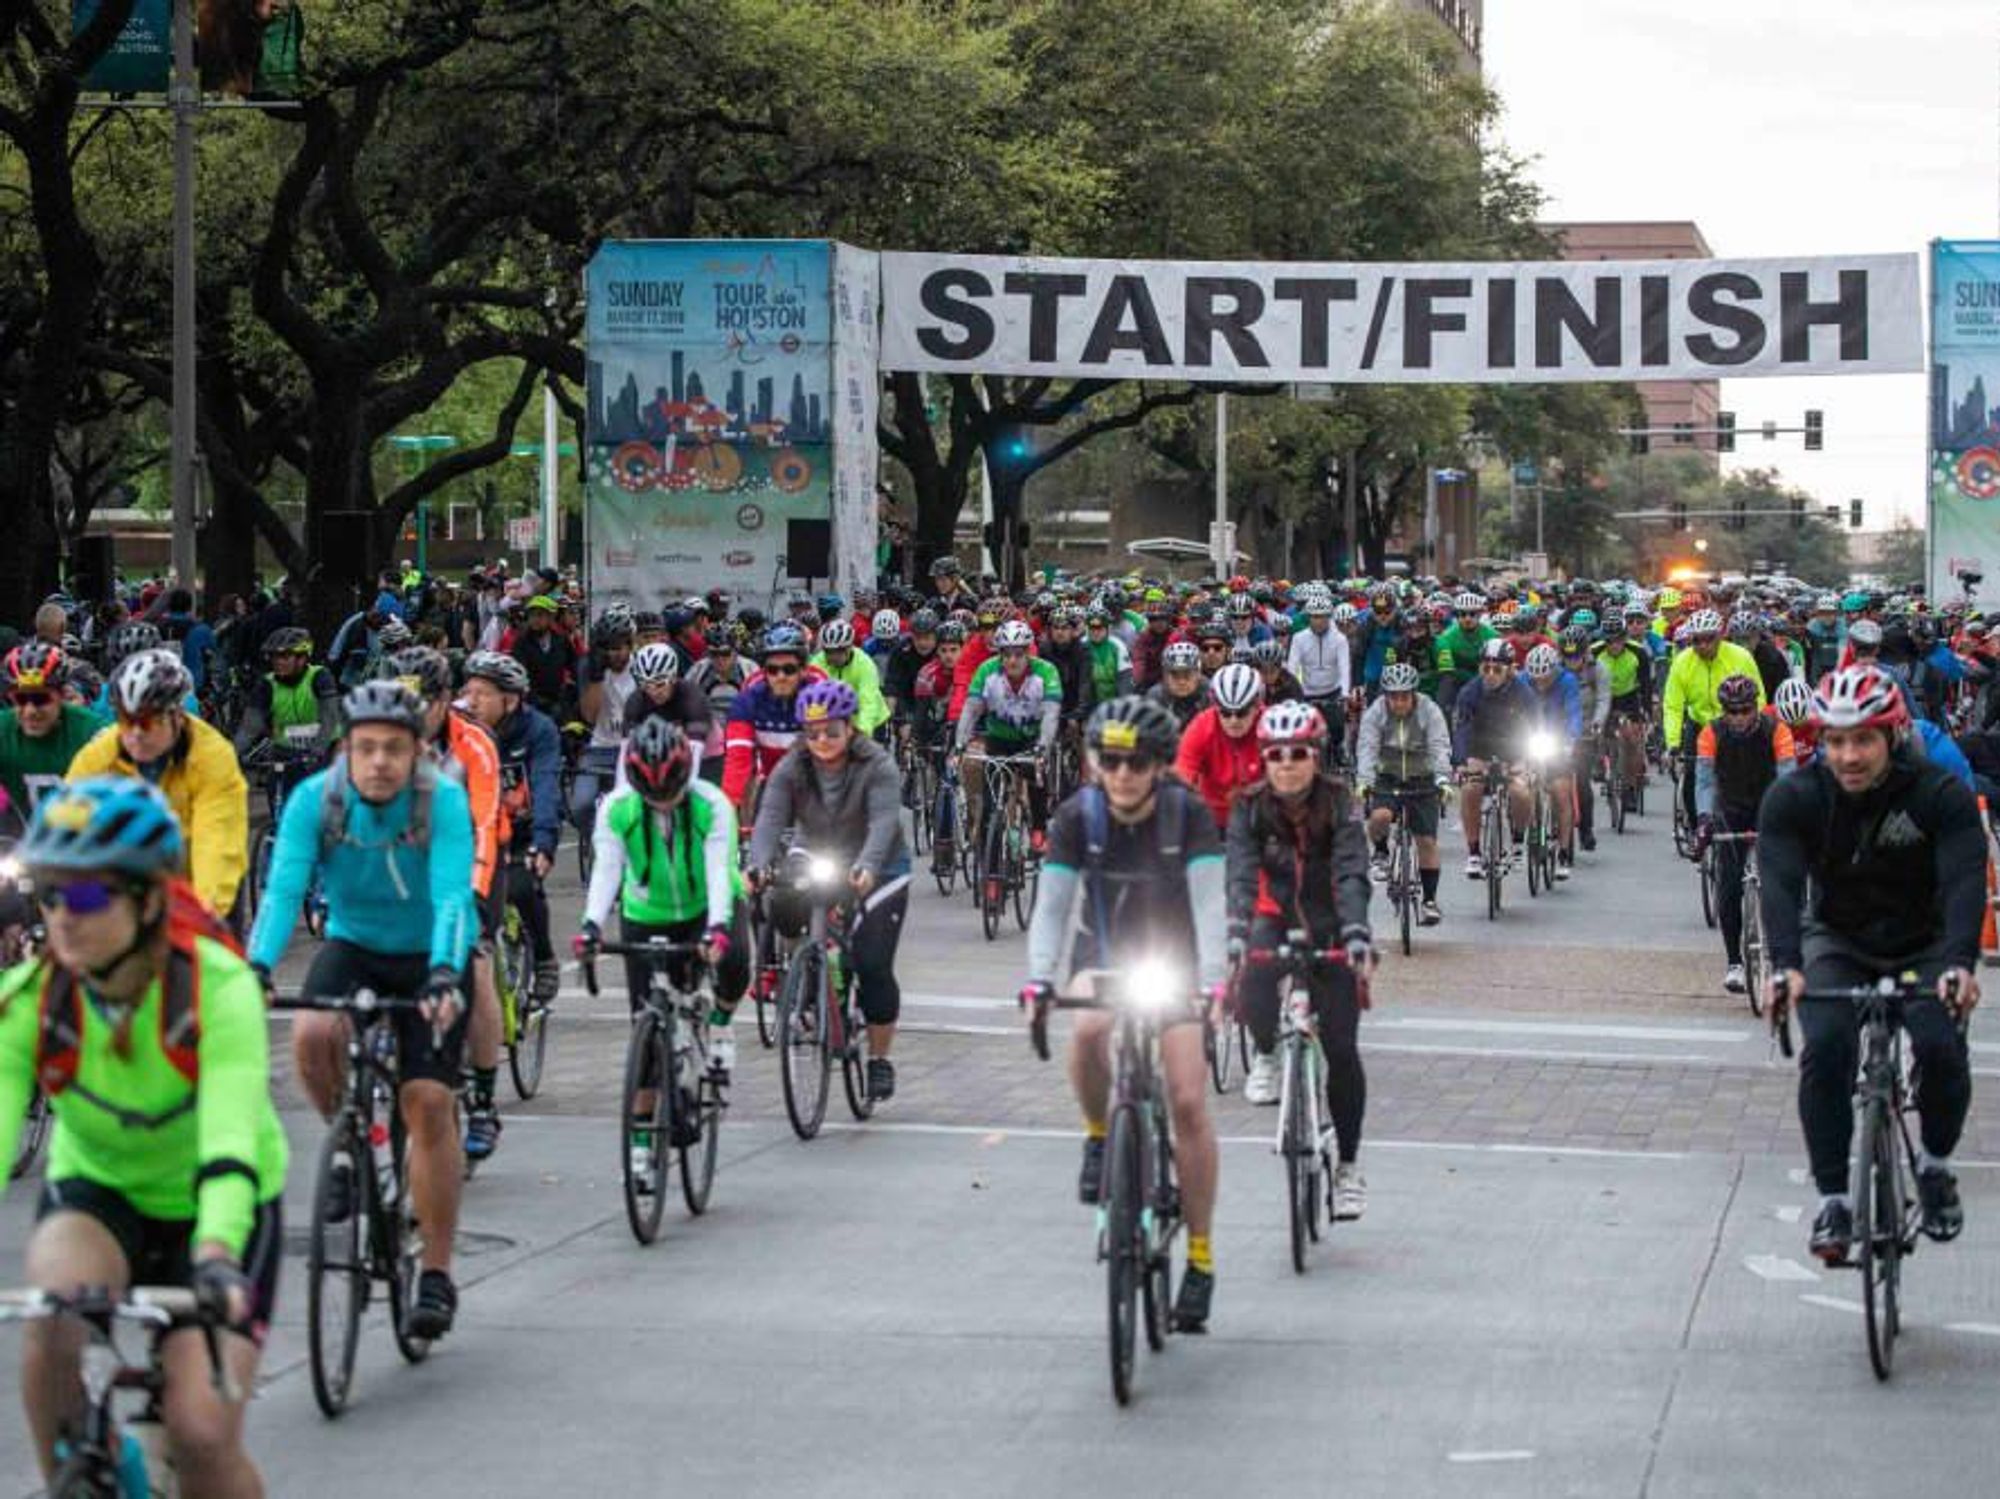 Tour de Houston annual bike ride welcomes cyclists back with scenic